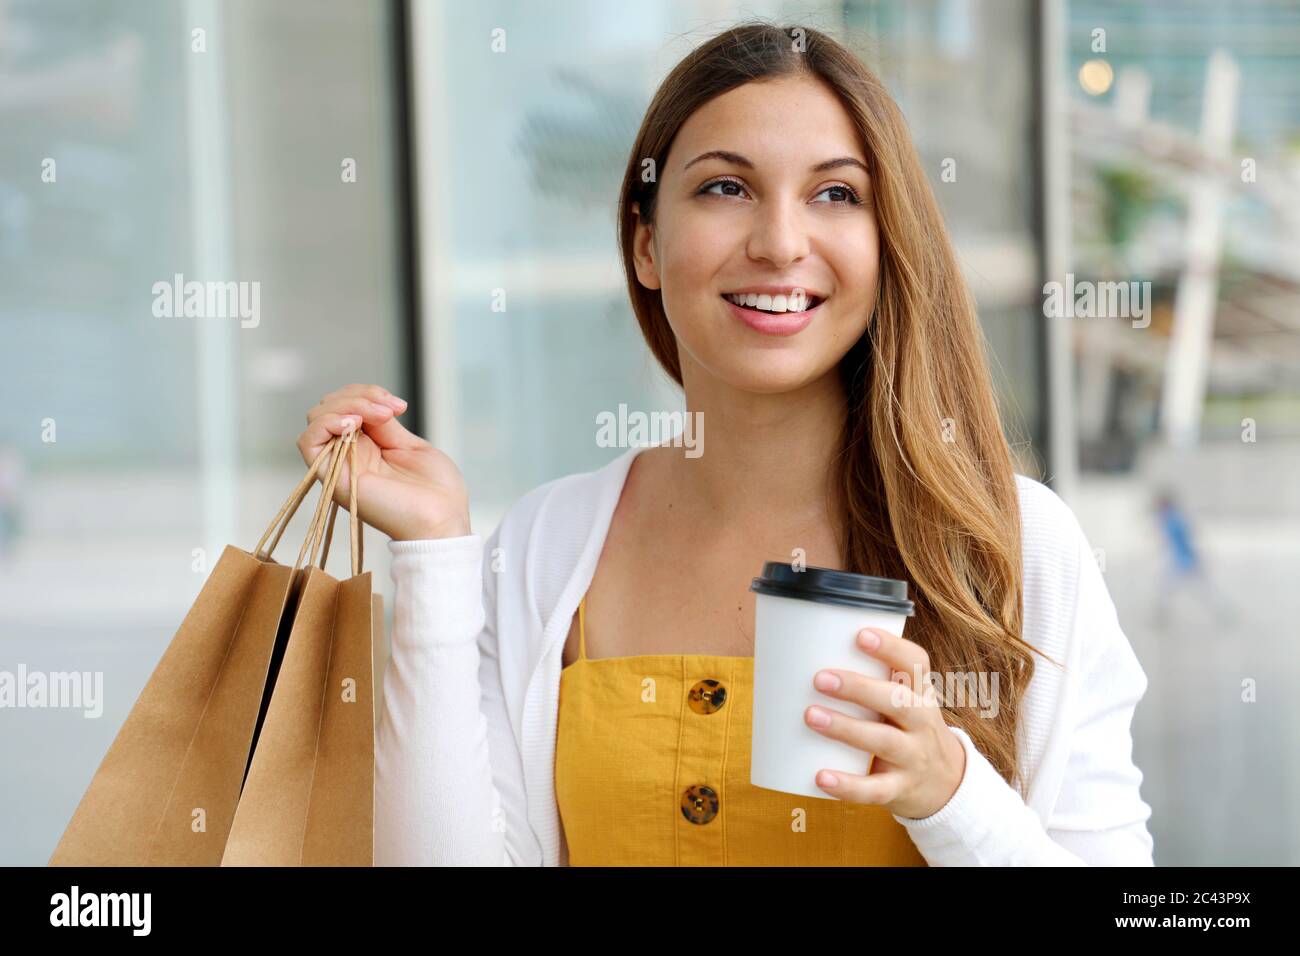 Positive young smiling woman looking aside with shopping bags and cup of cappuccino in her hands Stock Photo